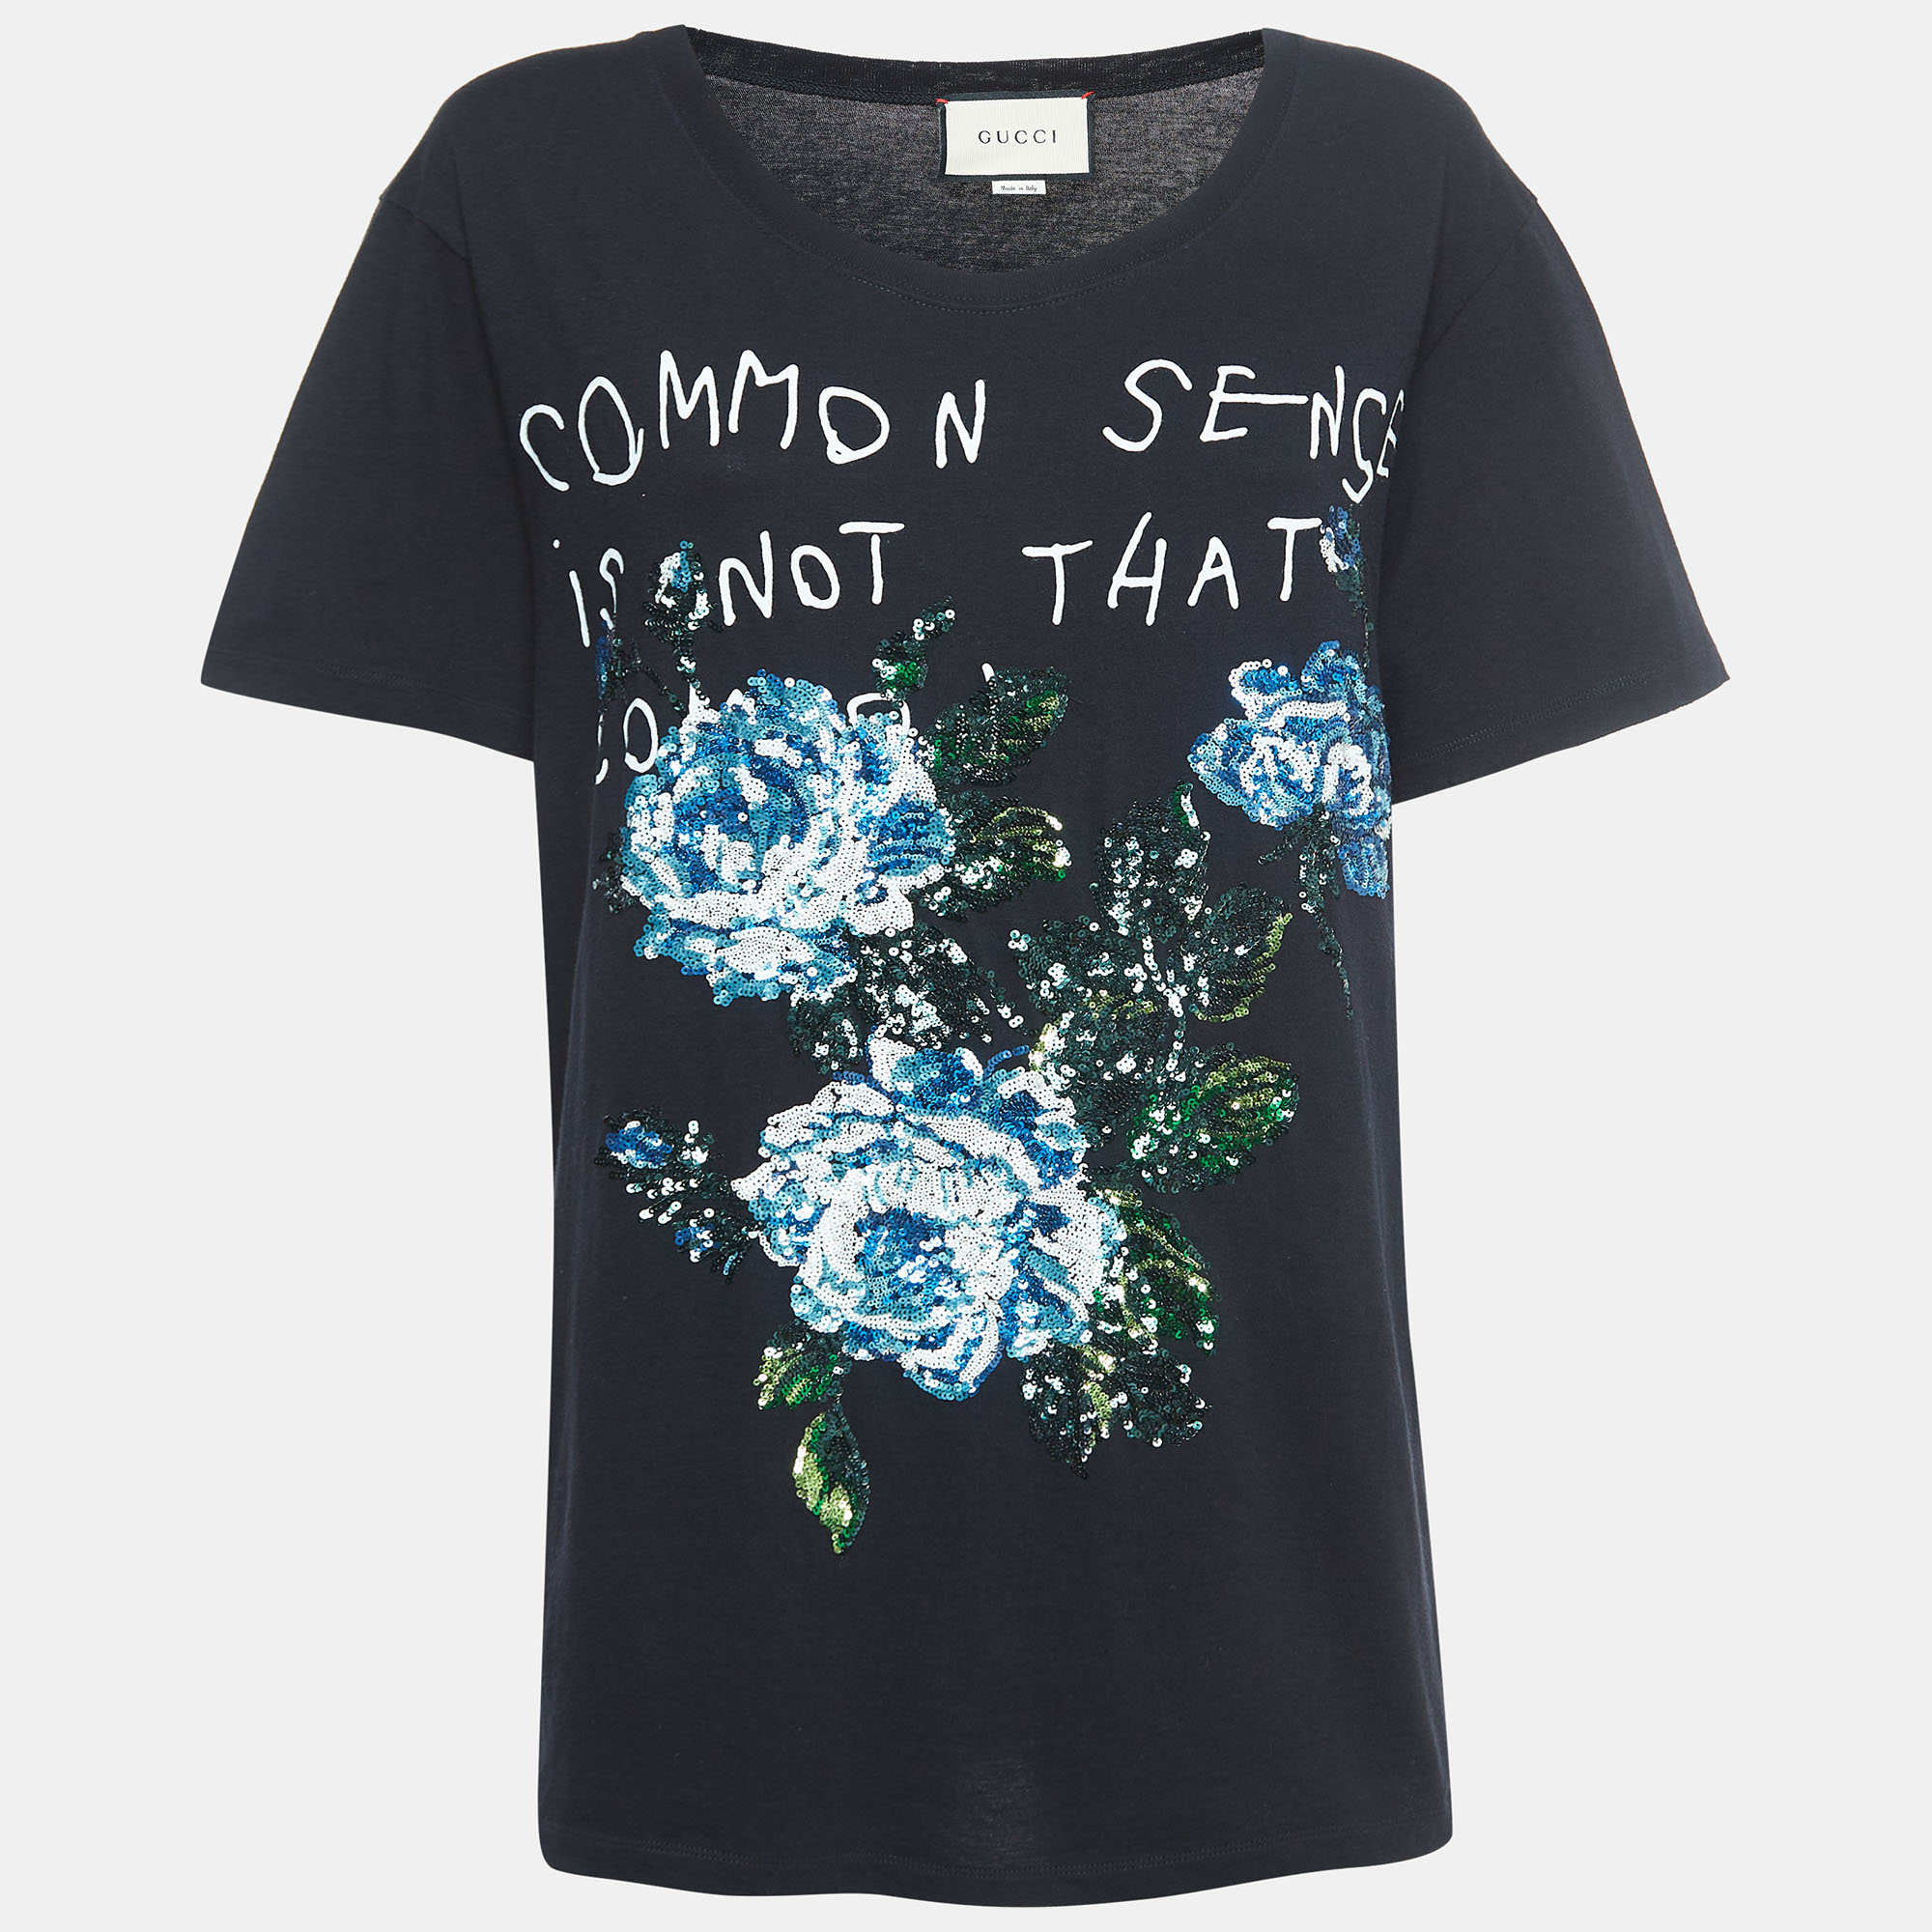 Gucci Black Sequined Embroidered Cotton T-Shirt S